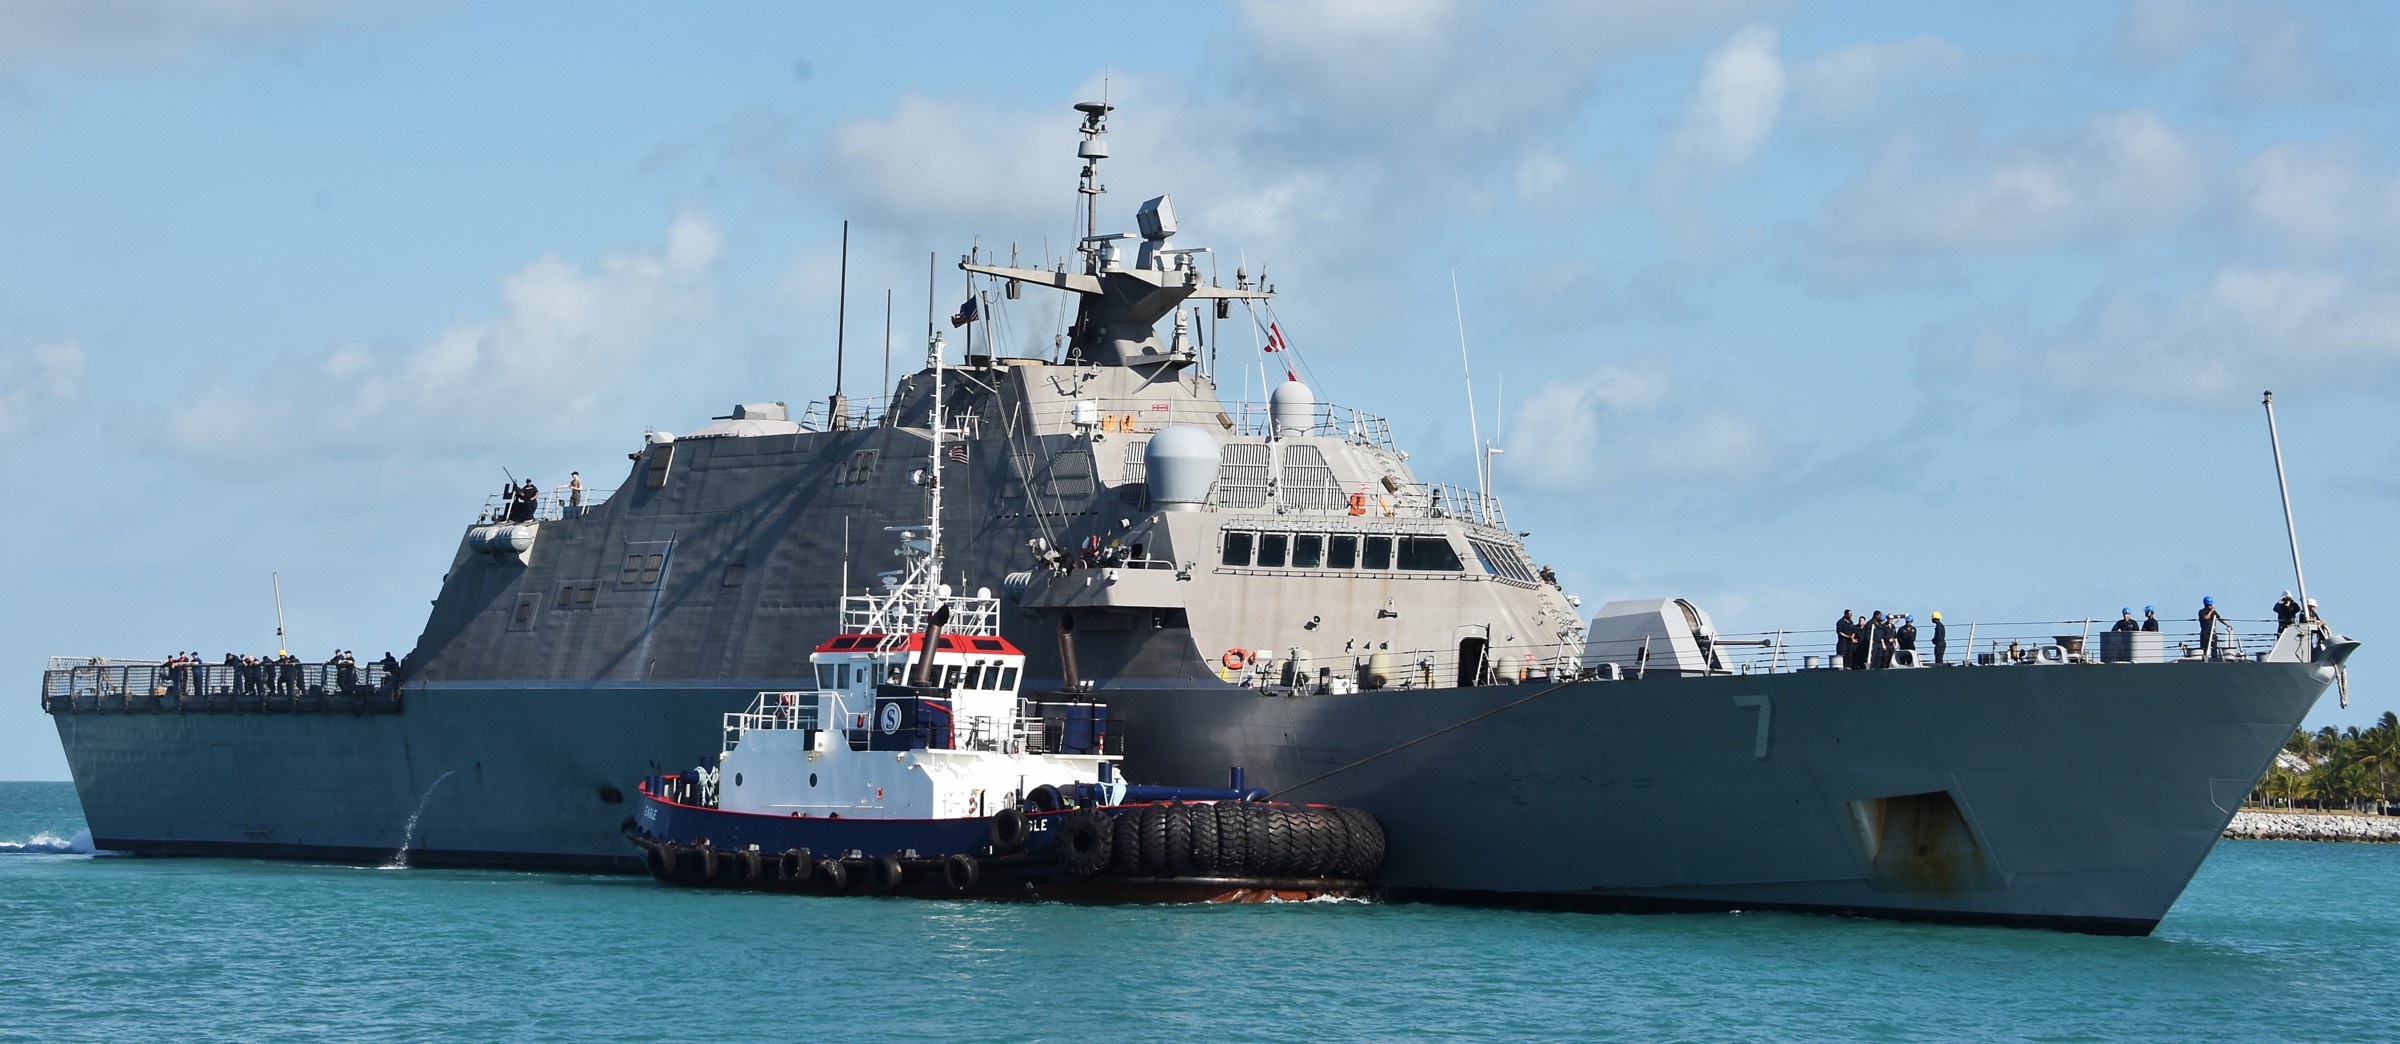 lcs-7 uss detroit freedom class littoral combat ship us navy 43 key west